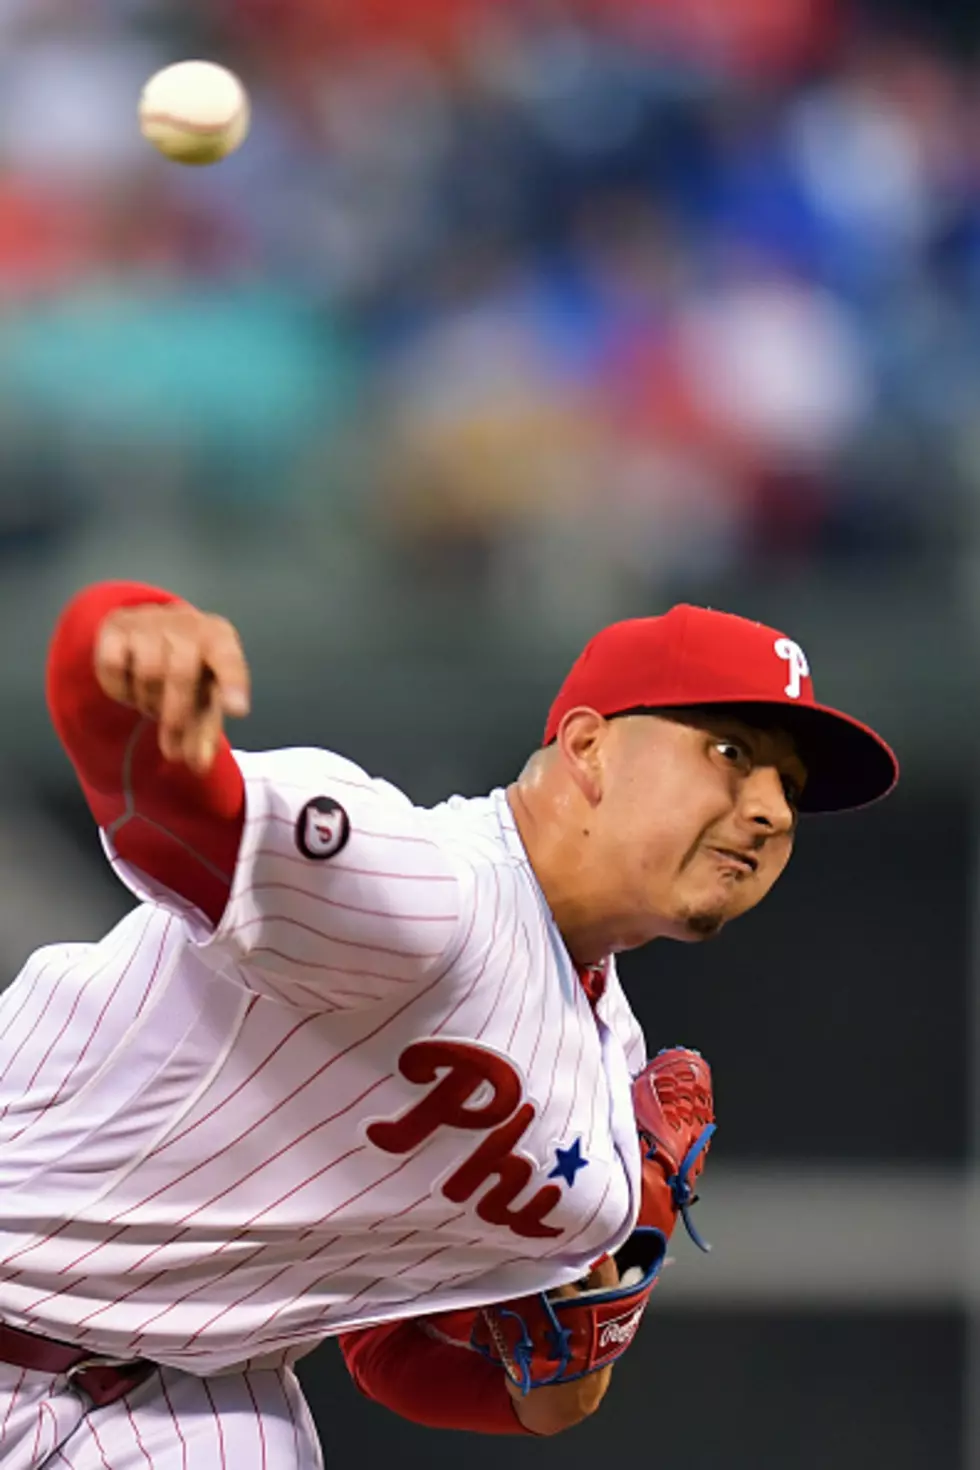 Cooney: Velasquez Might Be Best They Can Put In Bullpen